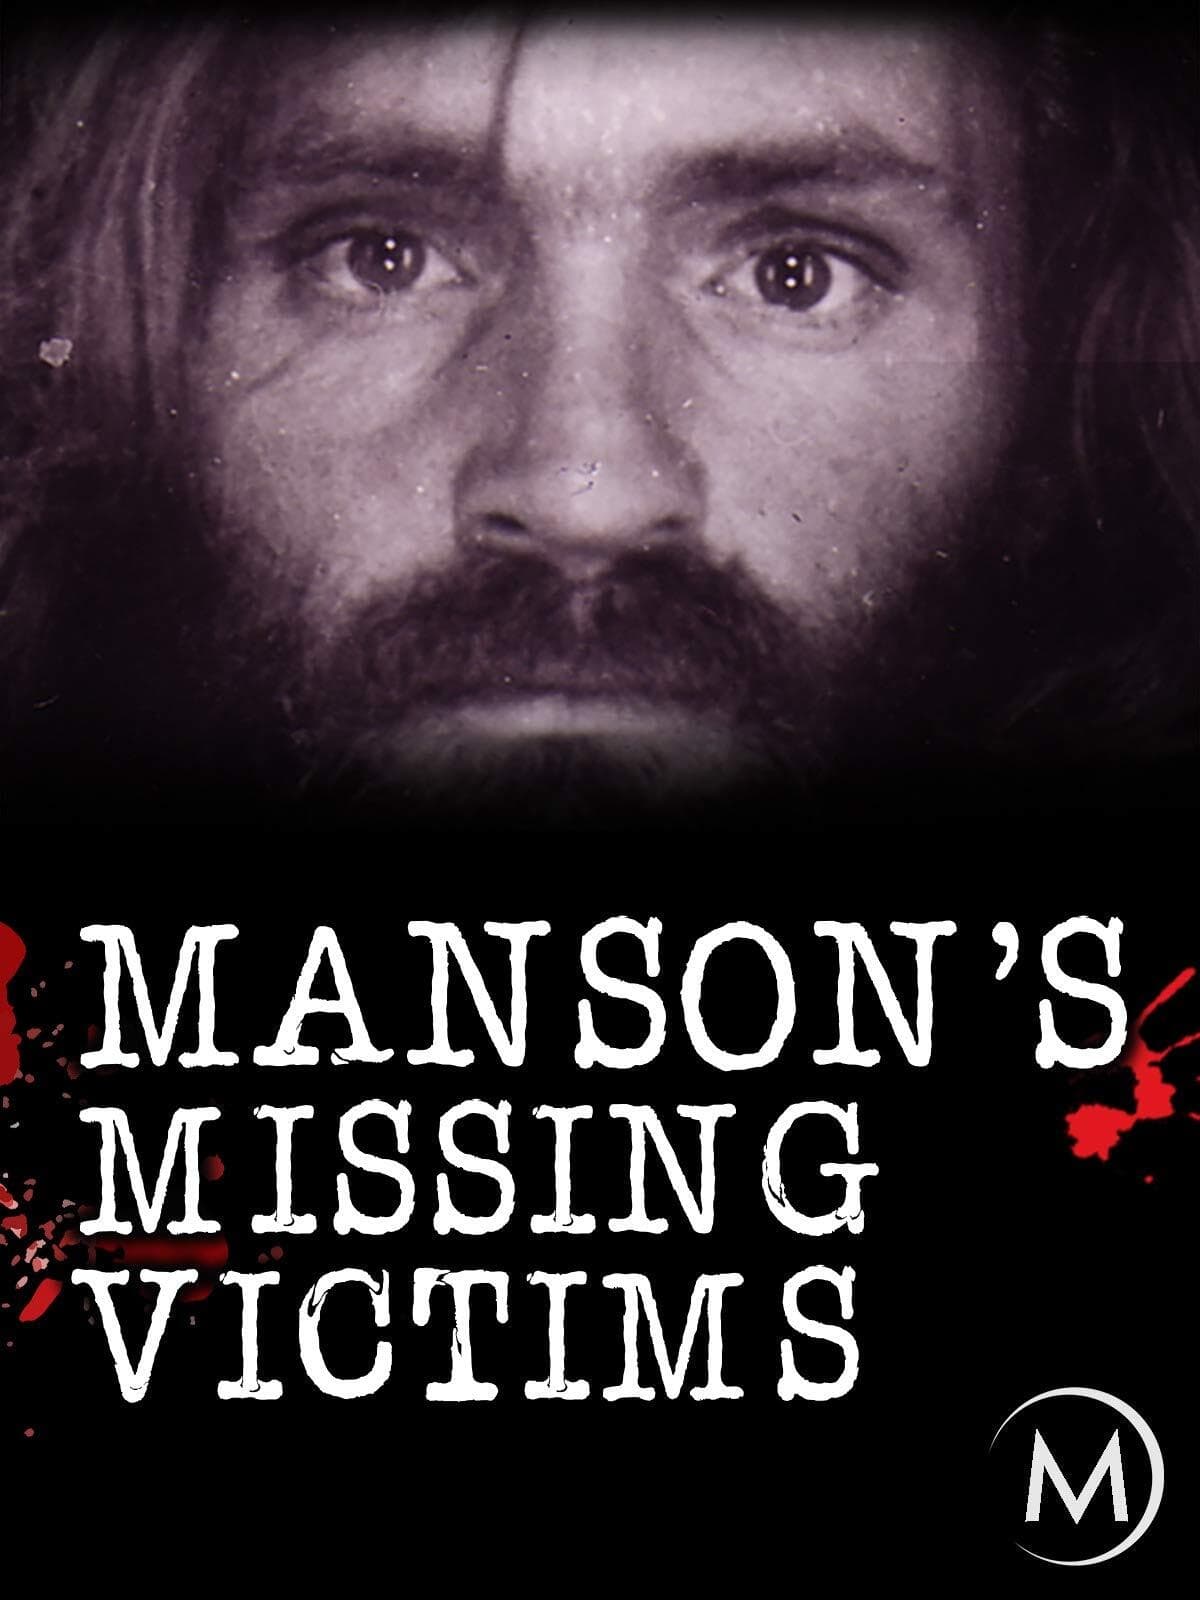 Manson's Missing Victims